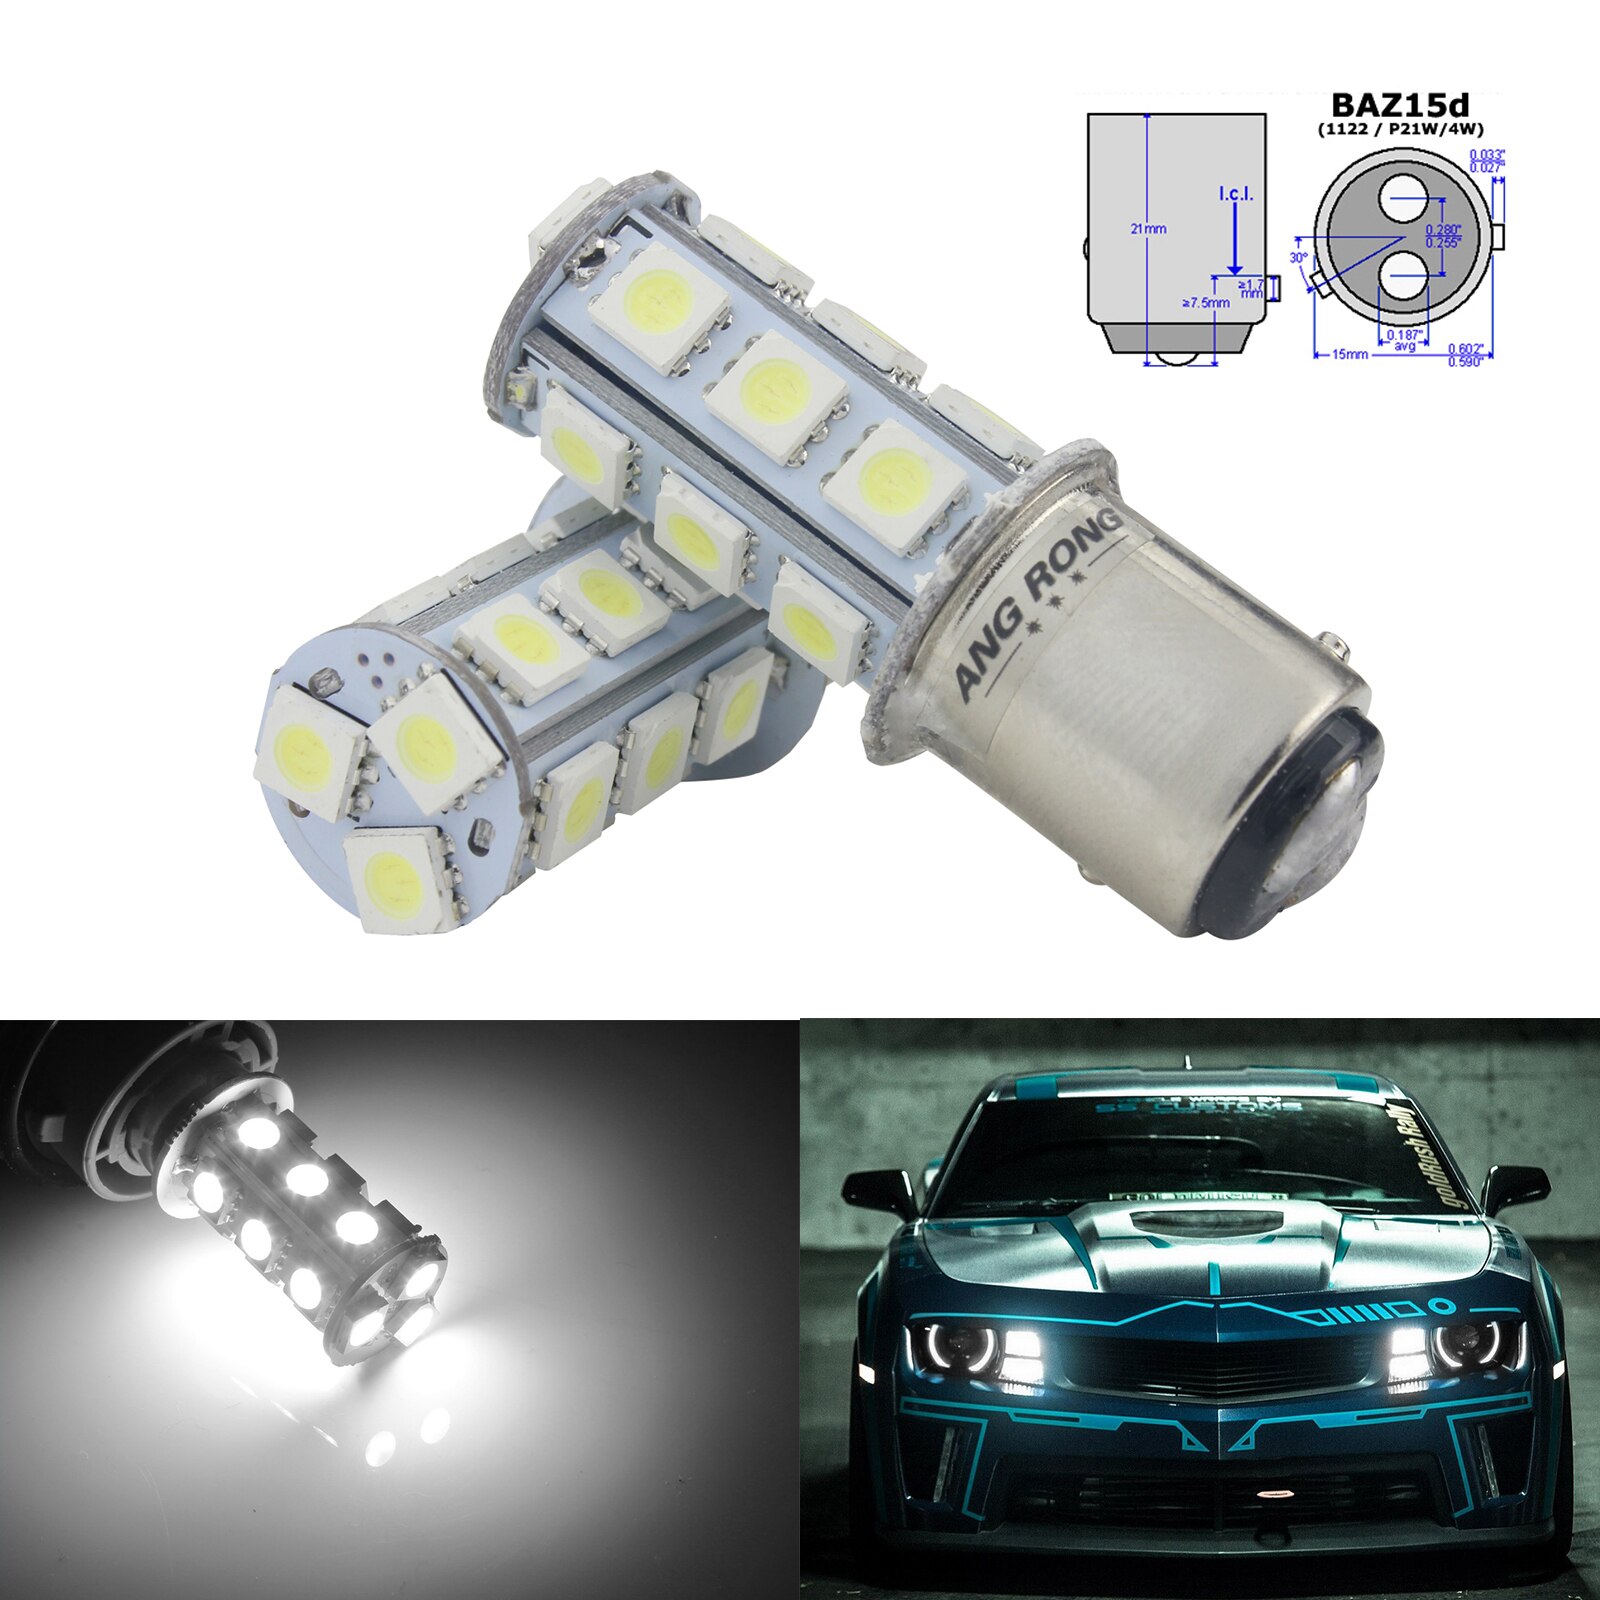 Angrong 2x baz15d p21/4 w 566 18 smd led  ڵ  ..